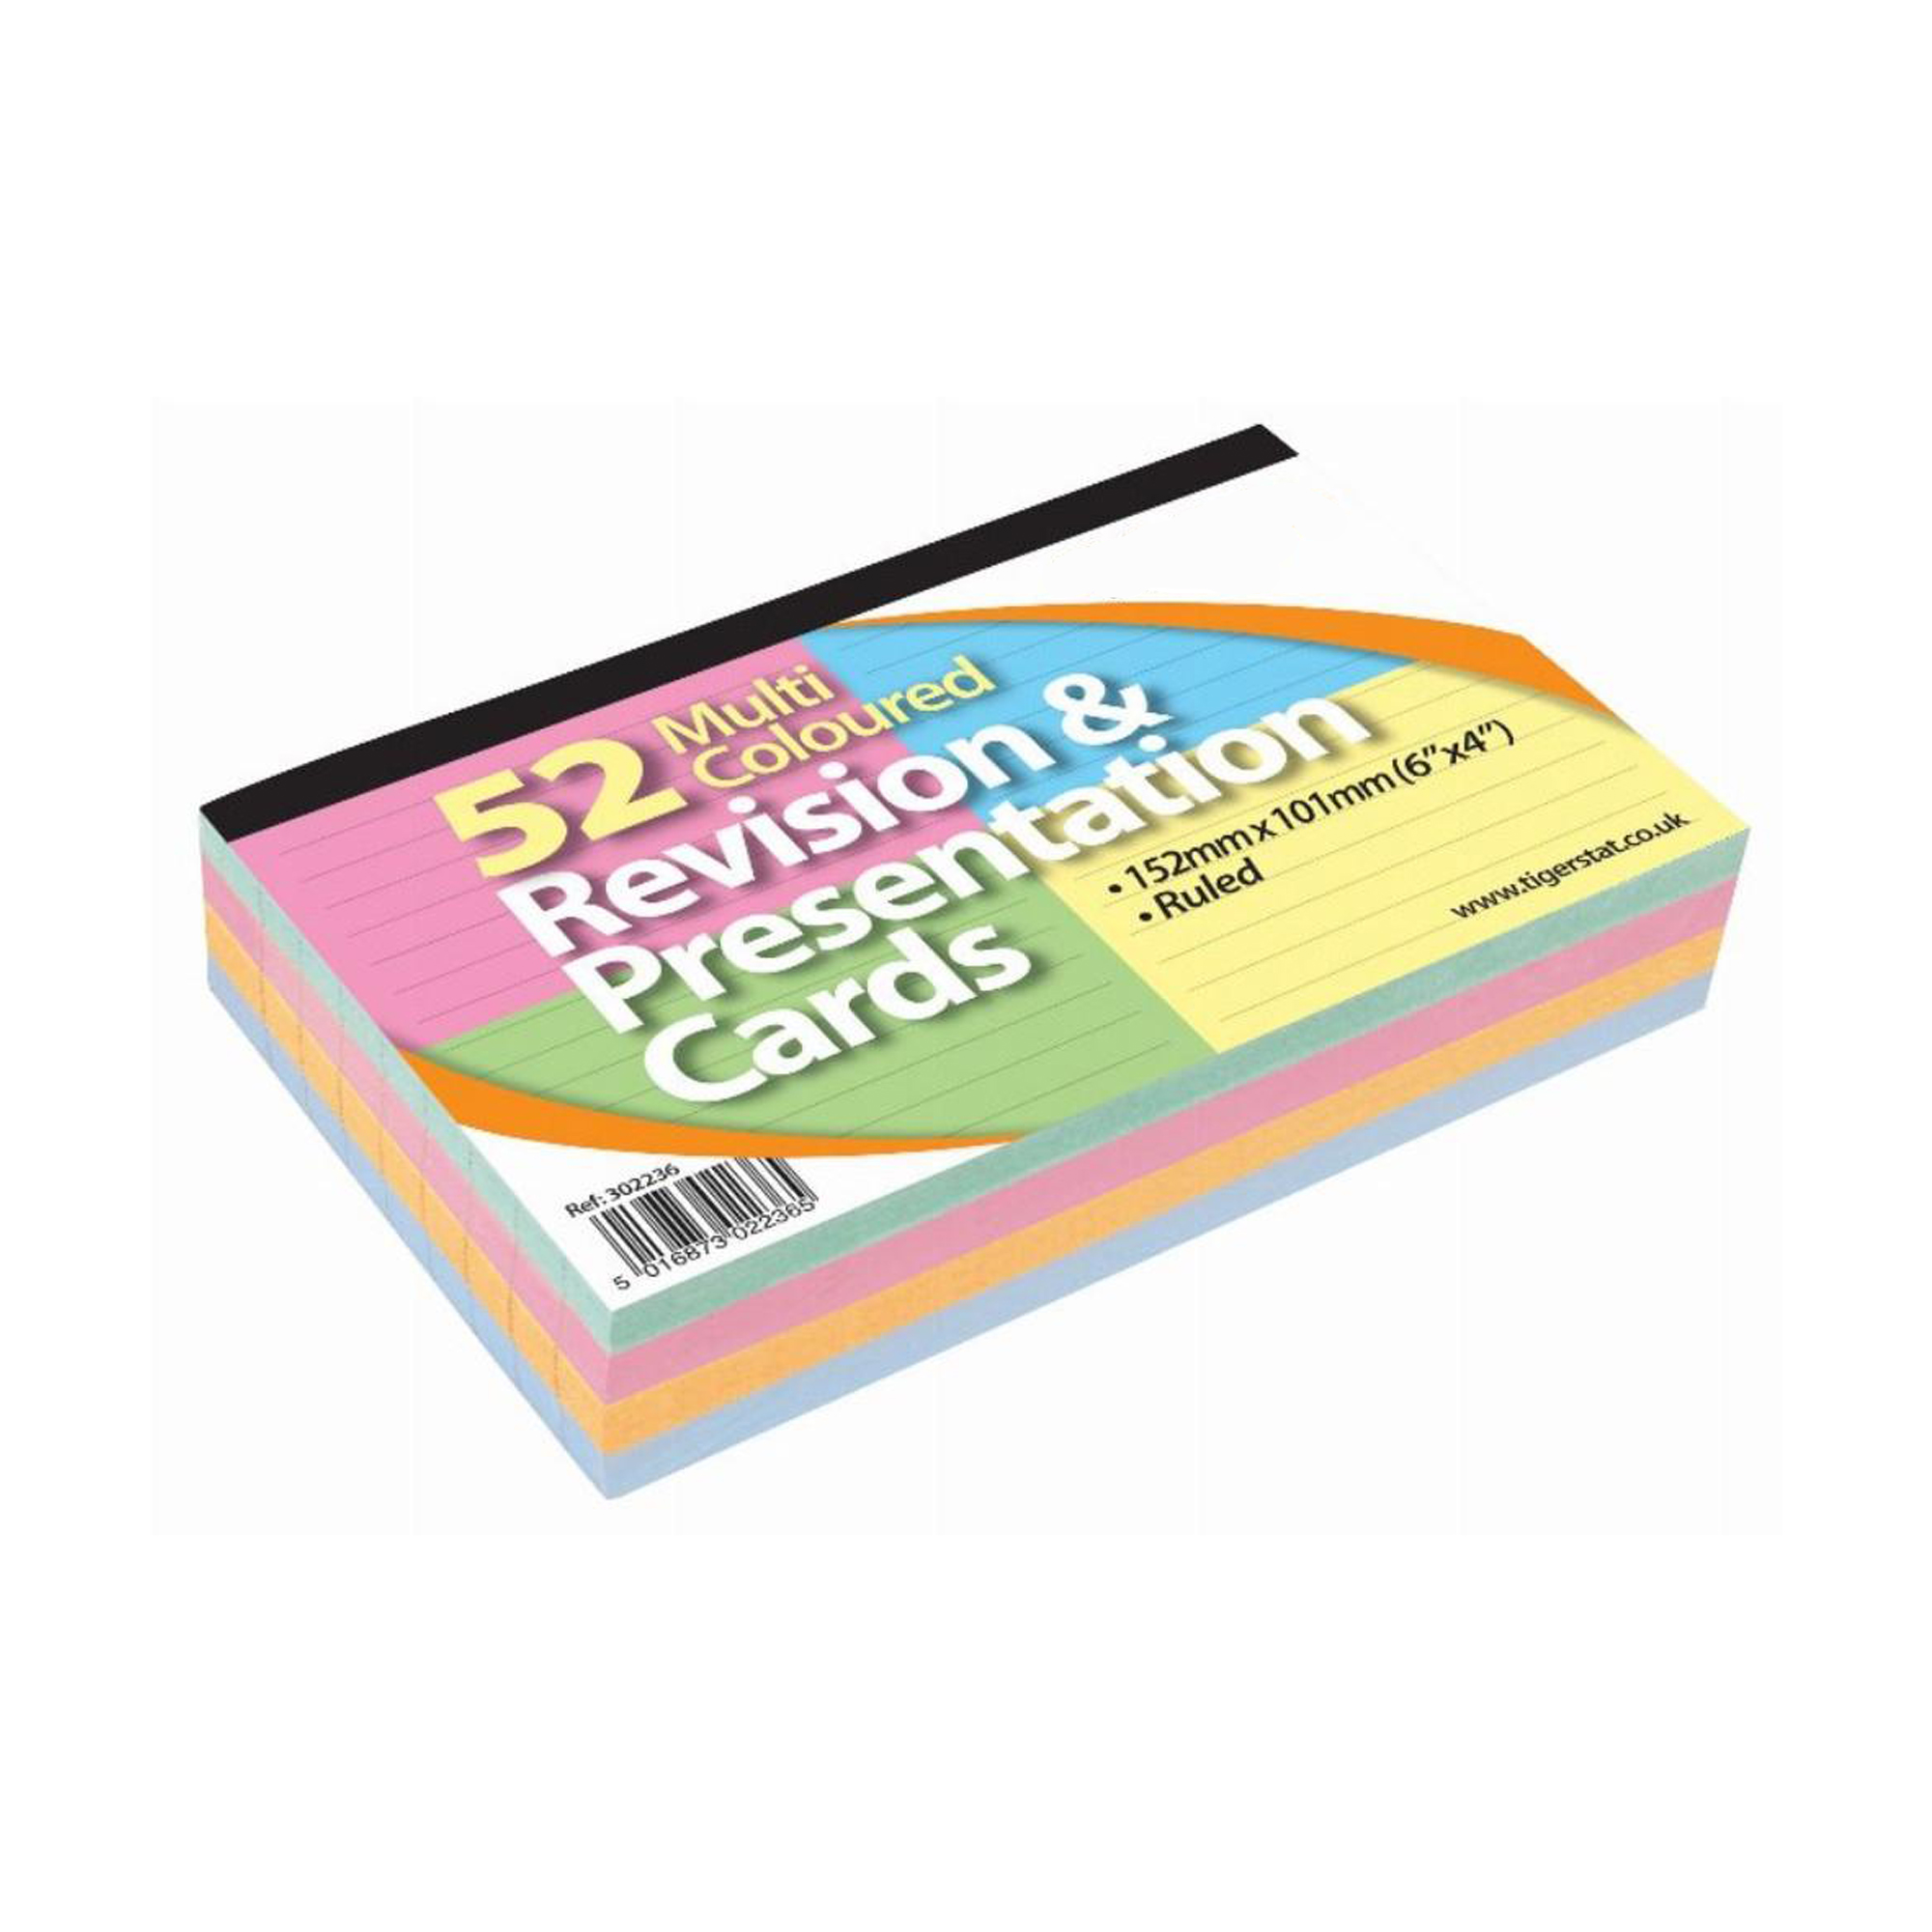 presentation and revision cards